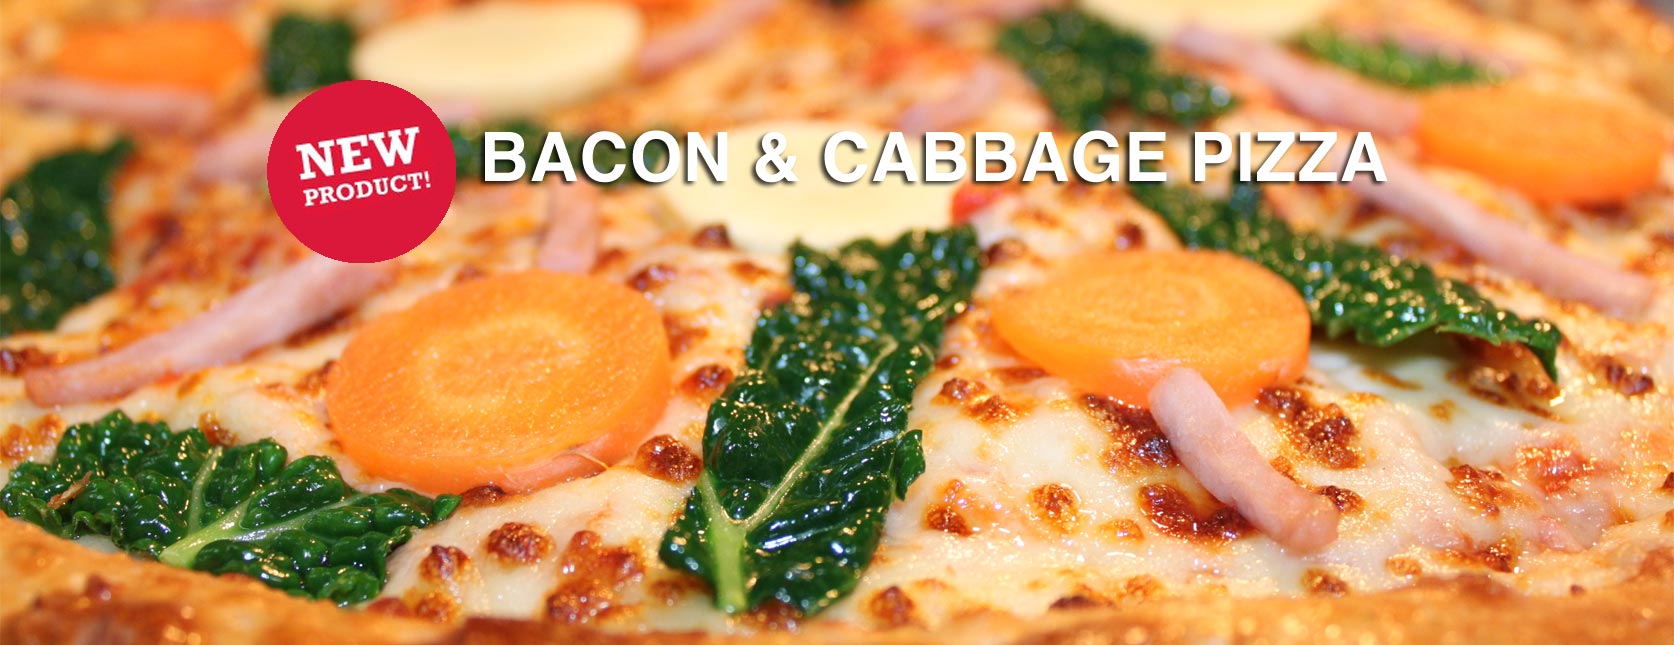 Available Now – Bacon & Cabbage Pizza!